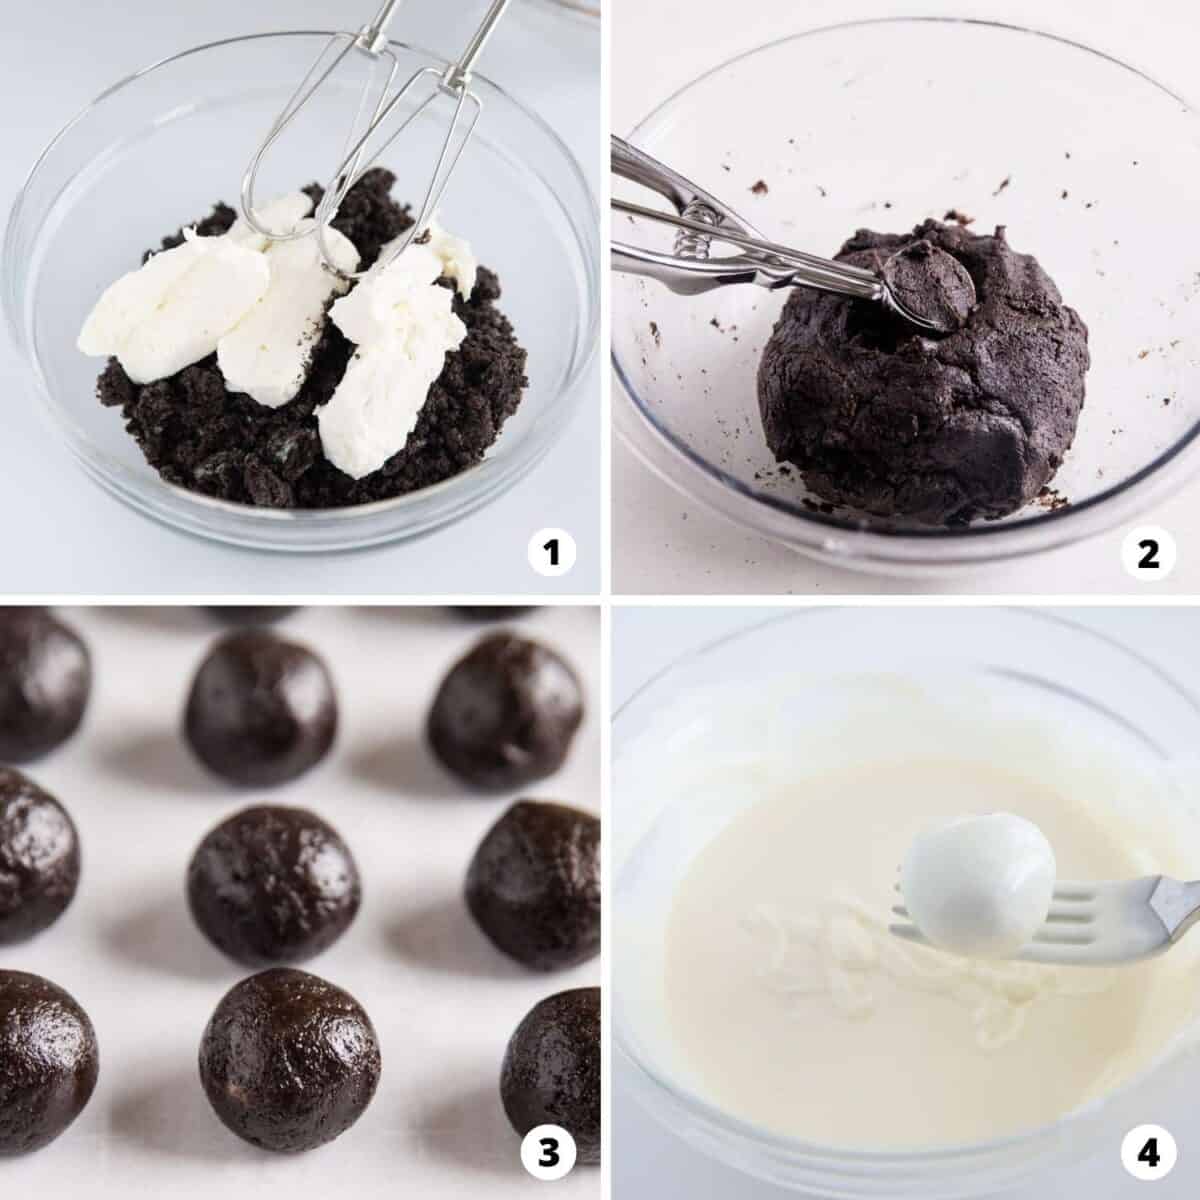 Process showing how to oreo balls in a four step collage.